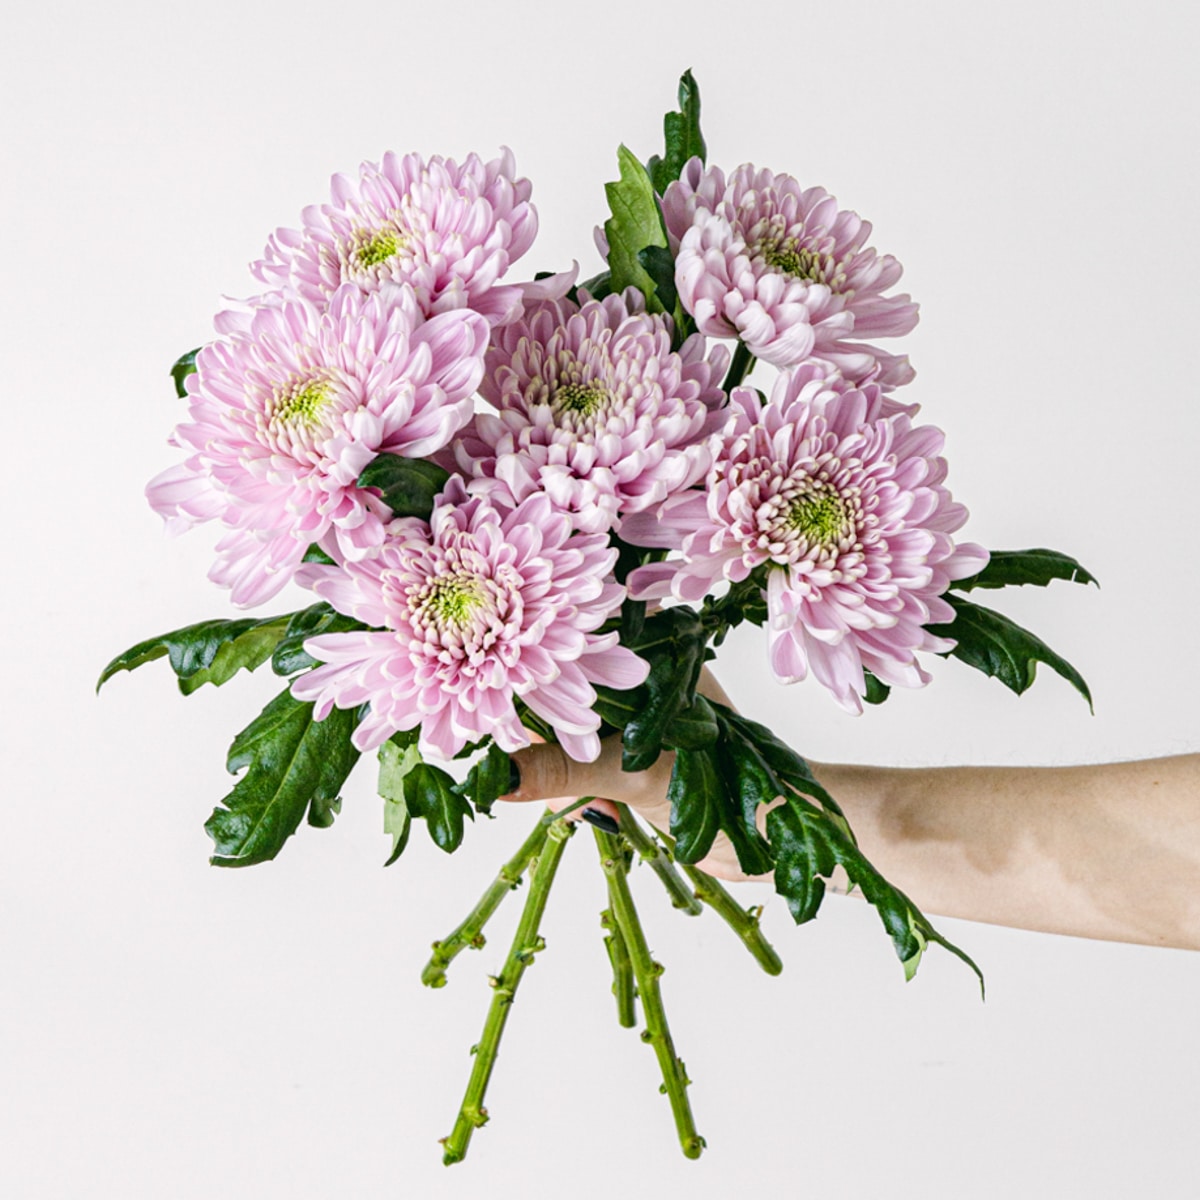 Bouquet of pink chrysanthemum flowers with vase